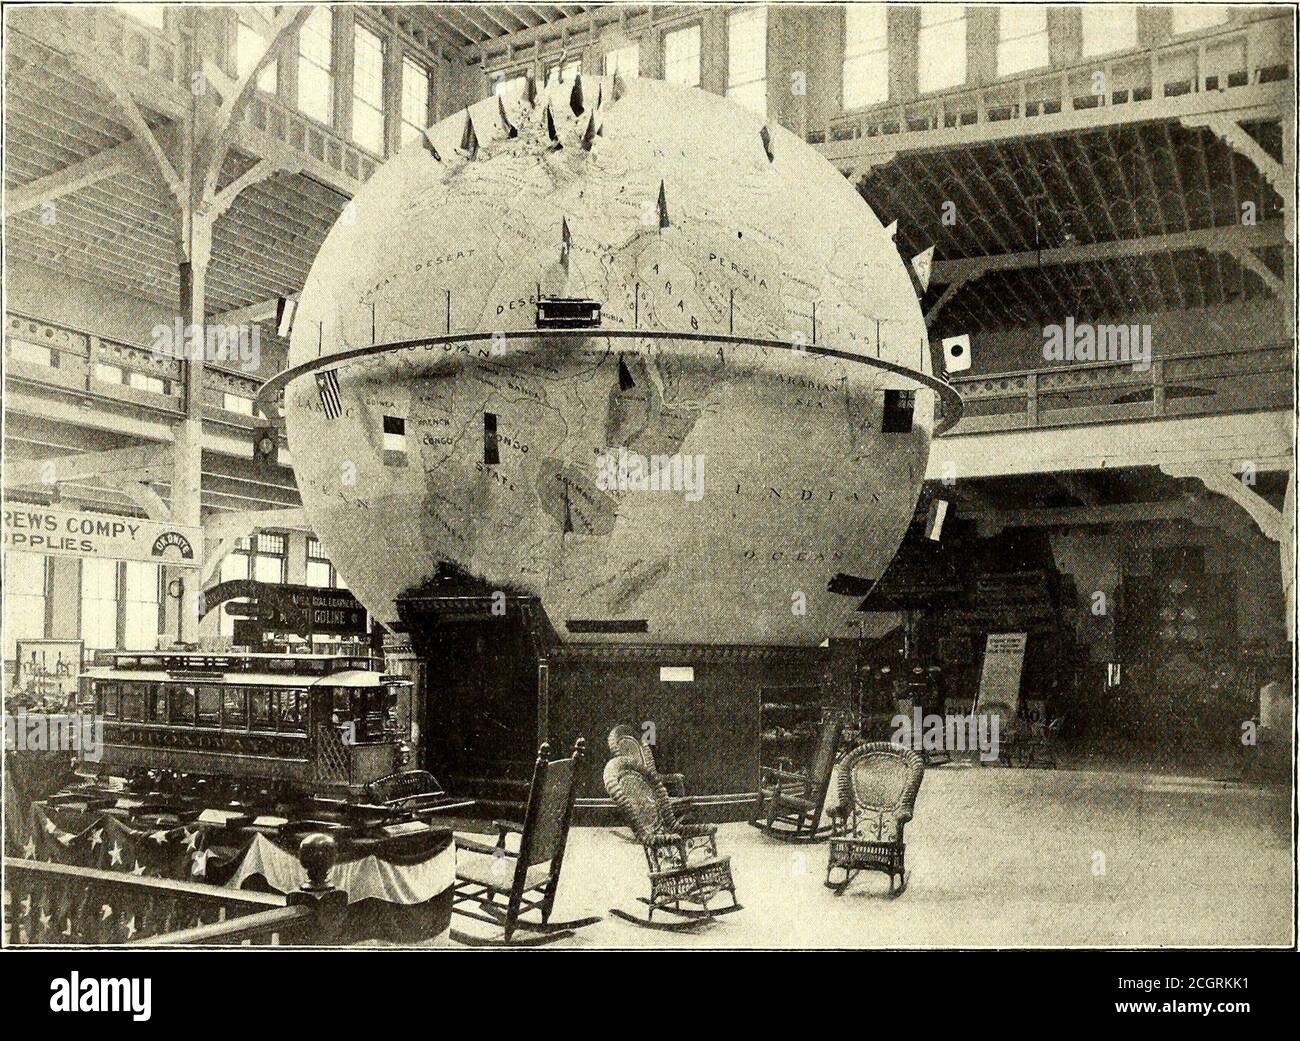 . The Street railway journal . n of 1900. Thespace behind the globe was set out with comfortable chairs for thebenefit of visitors. Here also was set up a model plant toshow the practical working of the Thomson car recordingmeter, consisting of a G. E. 800 motor, an R-11 con-controller and the necessary resistances, the car meter, fuseand a form M circuit breaker. The load was applied to the motor bymeans of a brake working on a pulley keyed to the armature shaft.Behind this plant was an instrument board, on which were exhib-ited the latest types of astatic volt and ampere meters, inclinedcoil Stock Photo